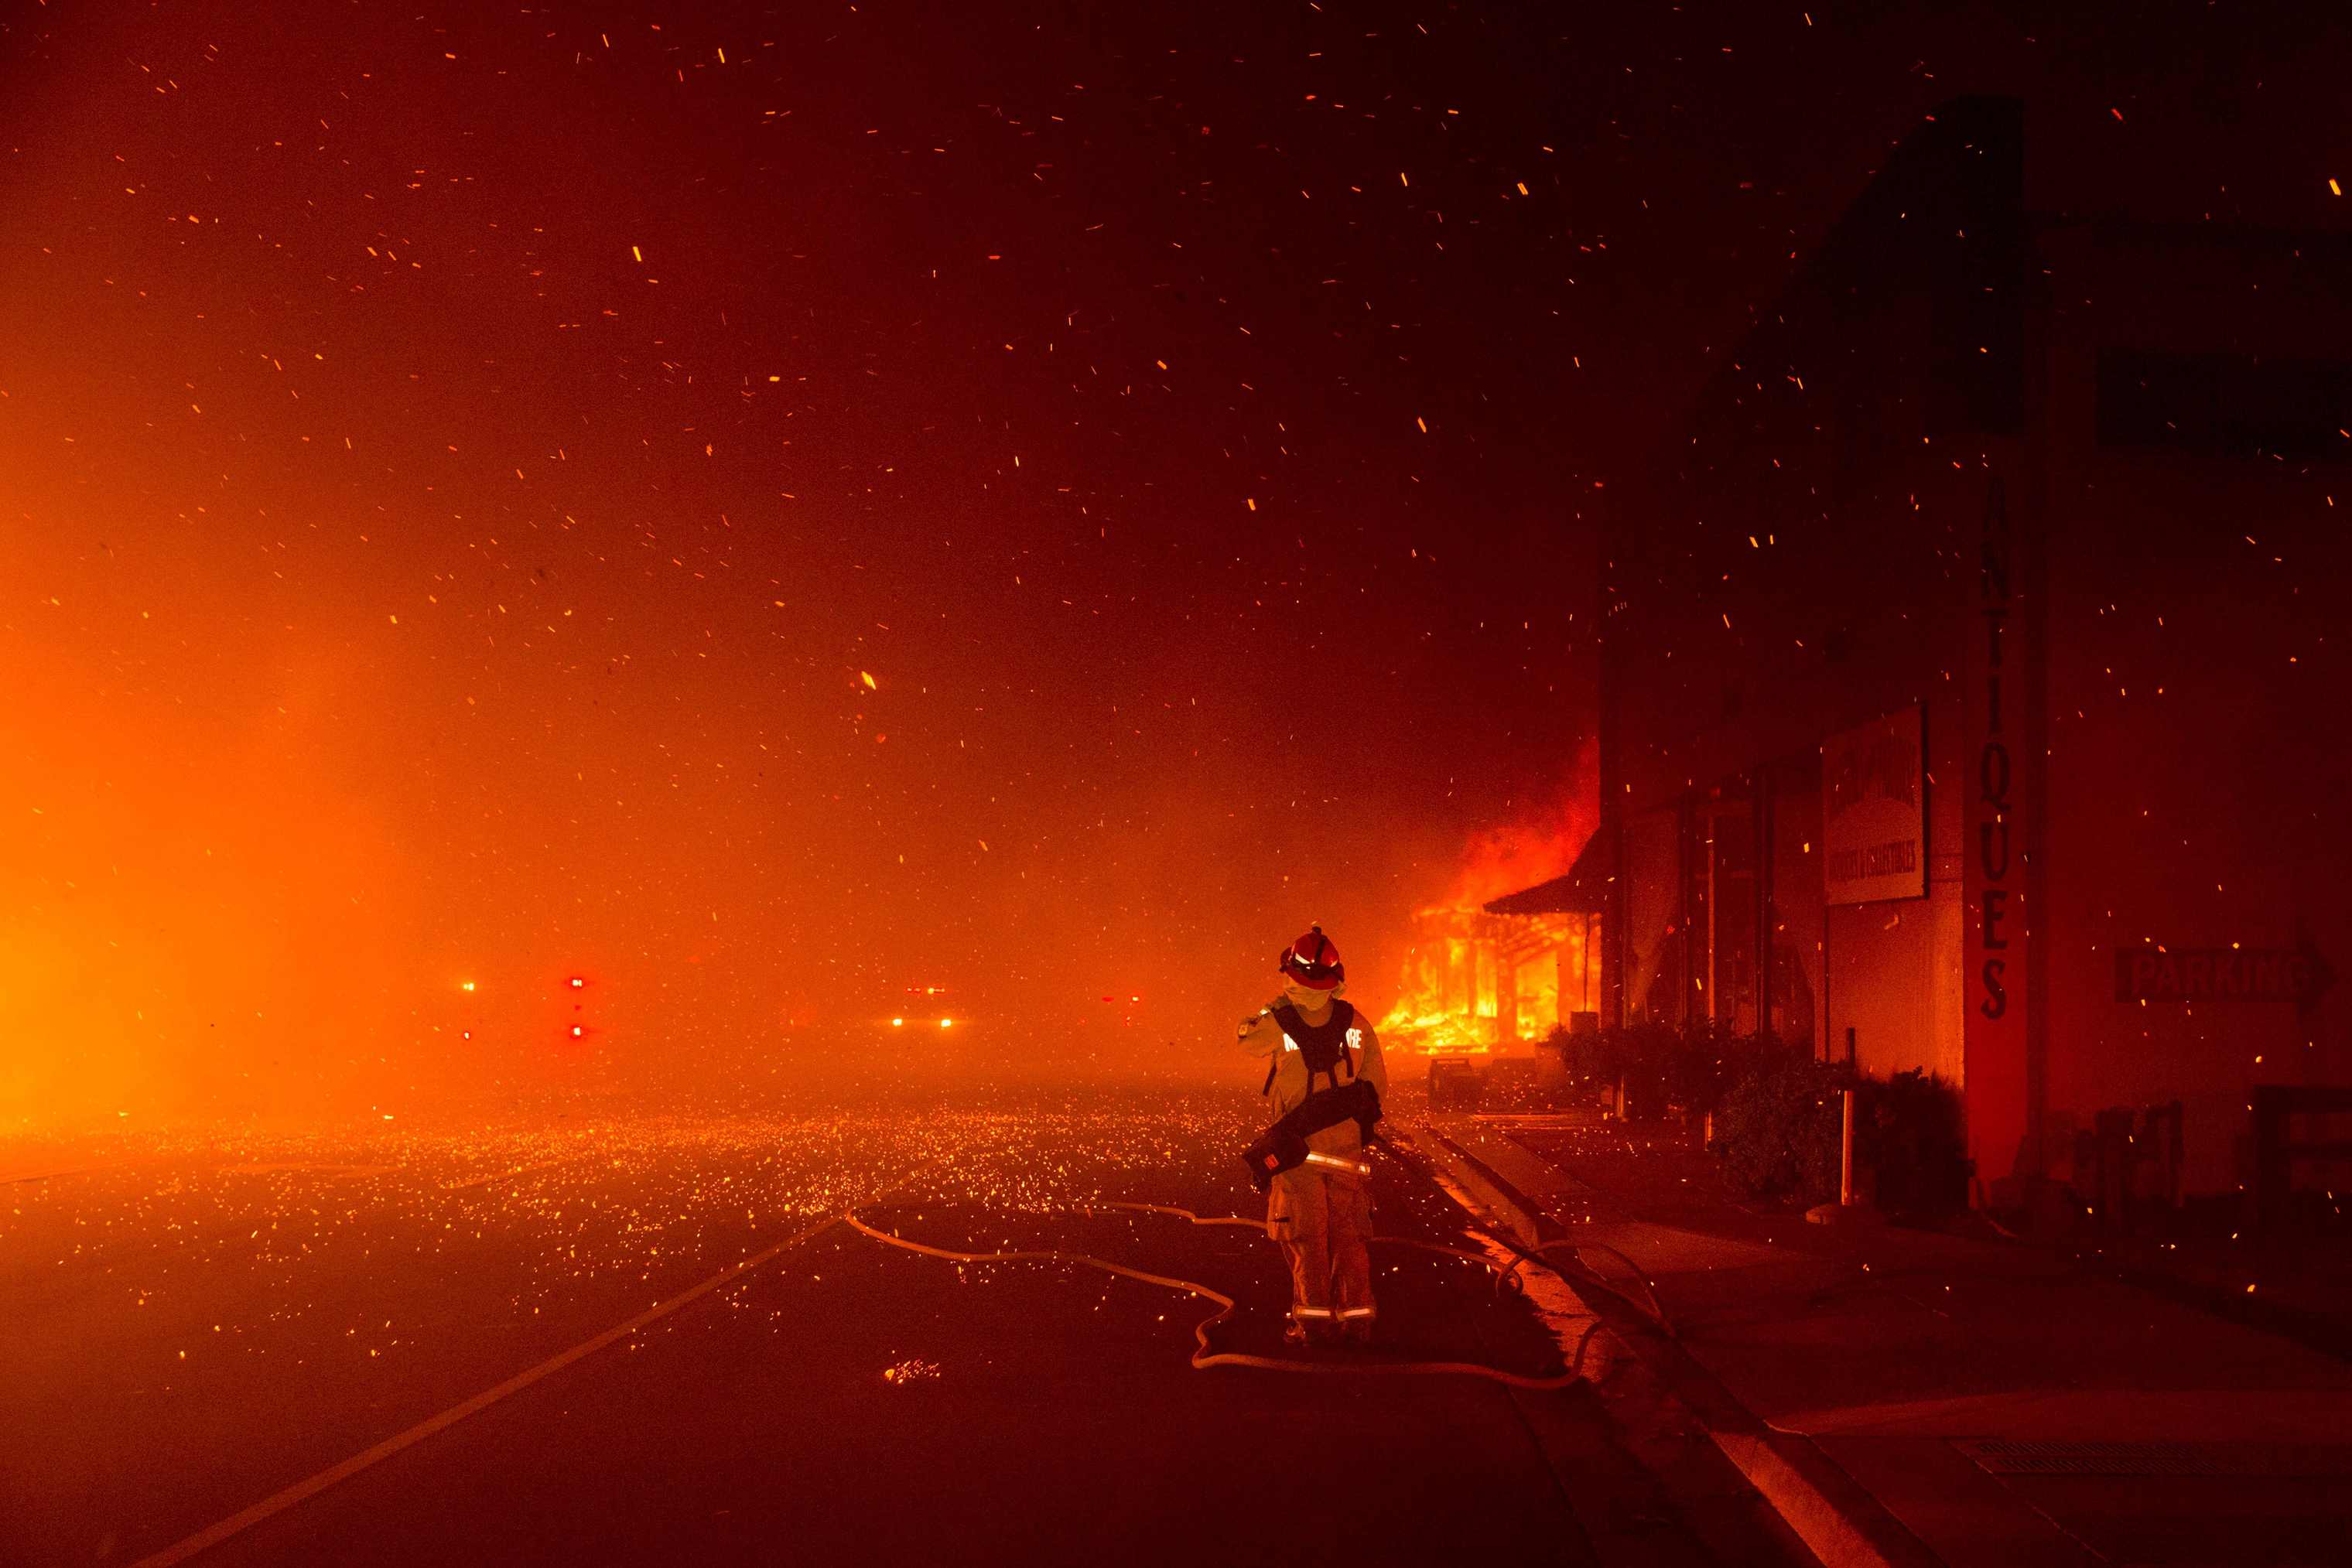 A fire fighter stands at the ready to protect a building across the street, as the Camp Fire burned out of control through Paradise, fueled by high winds in Butte County, Calif., on Nov. 8, 2018. (Peter Dasilva—EPA-EFE/Shutterstock)